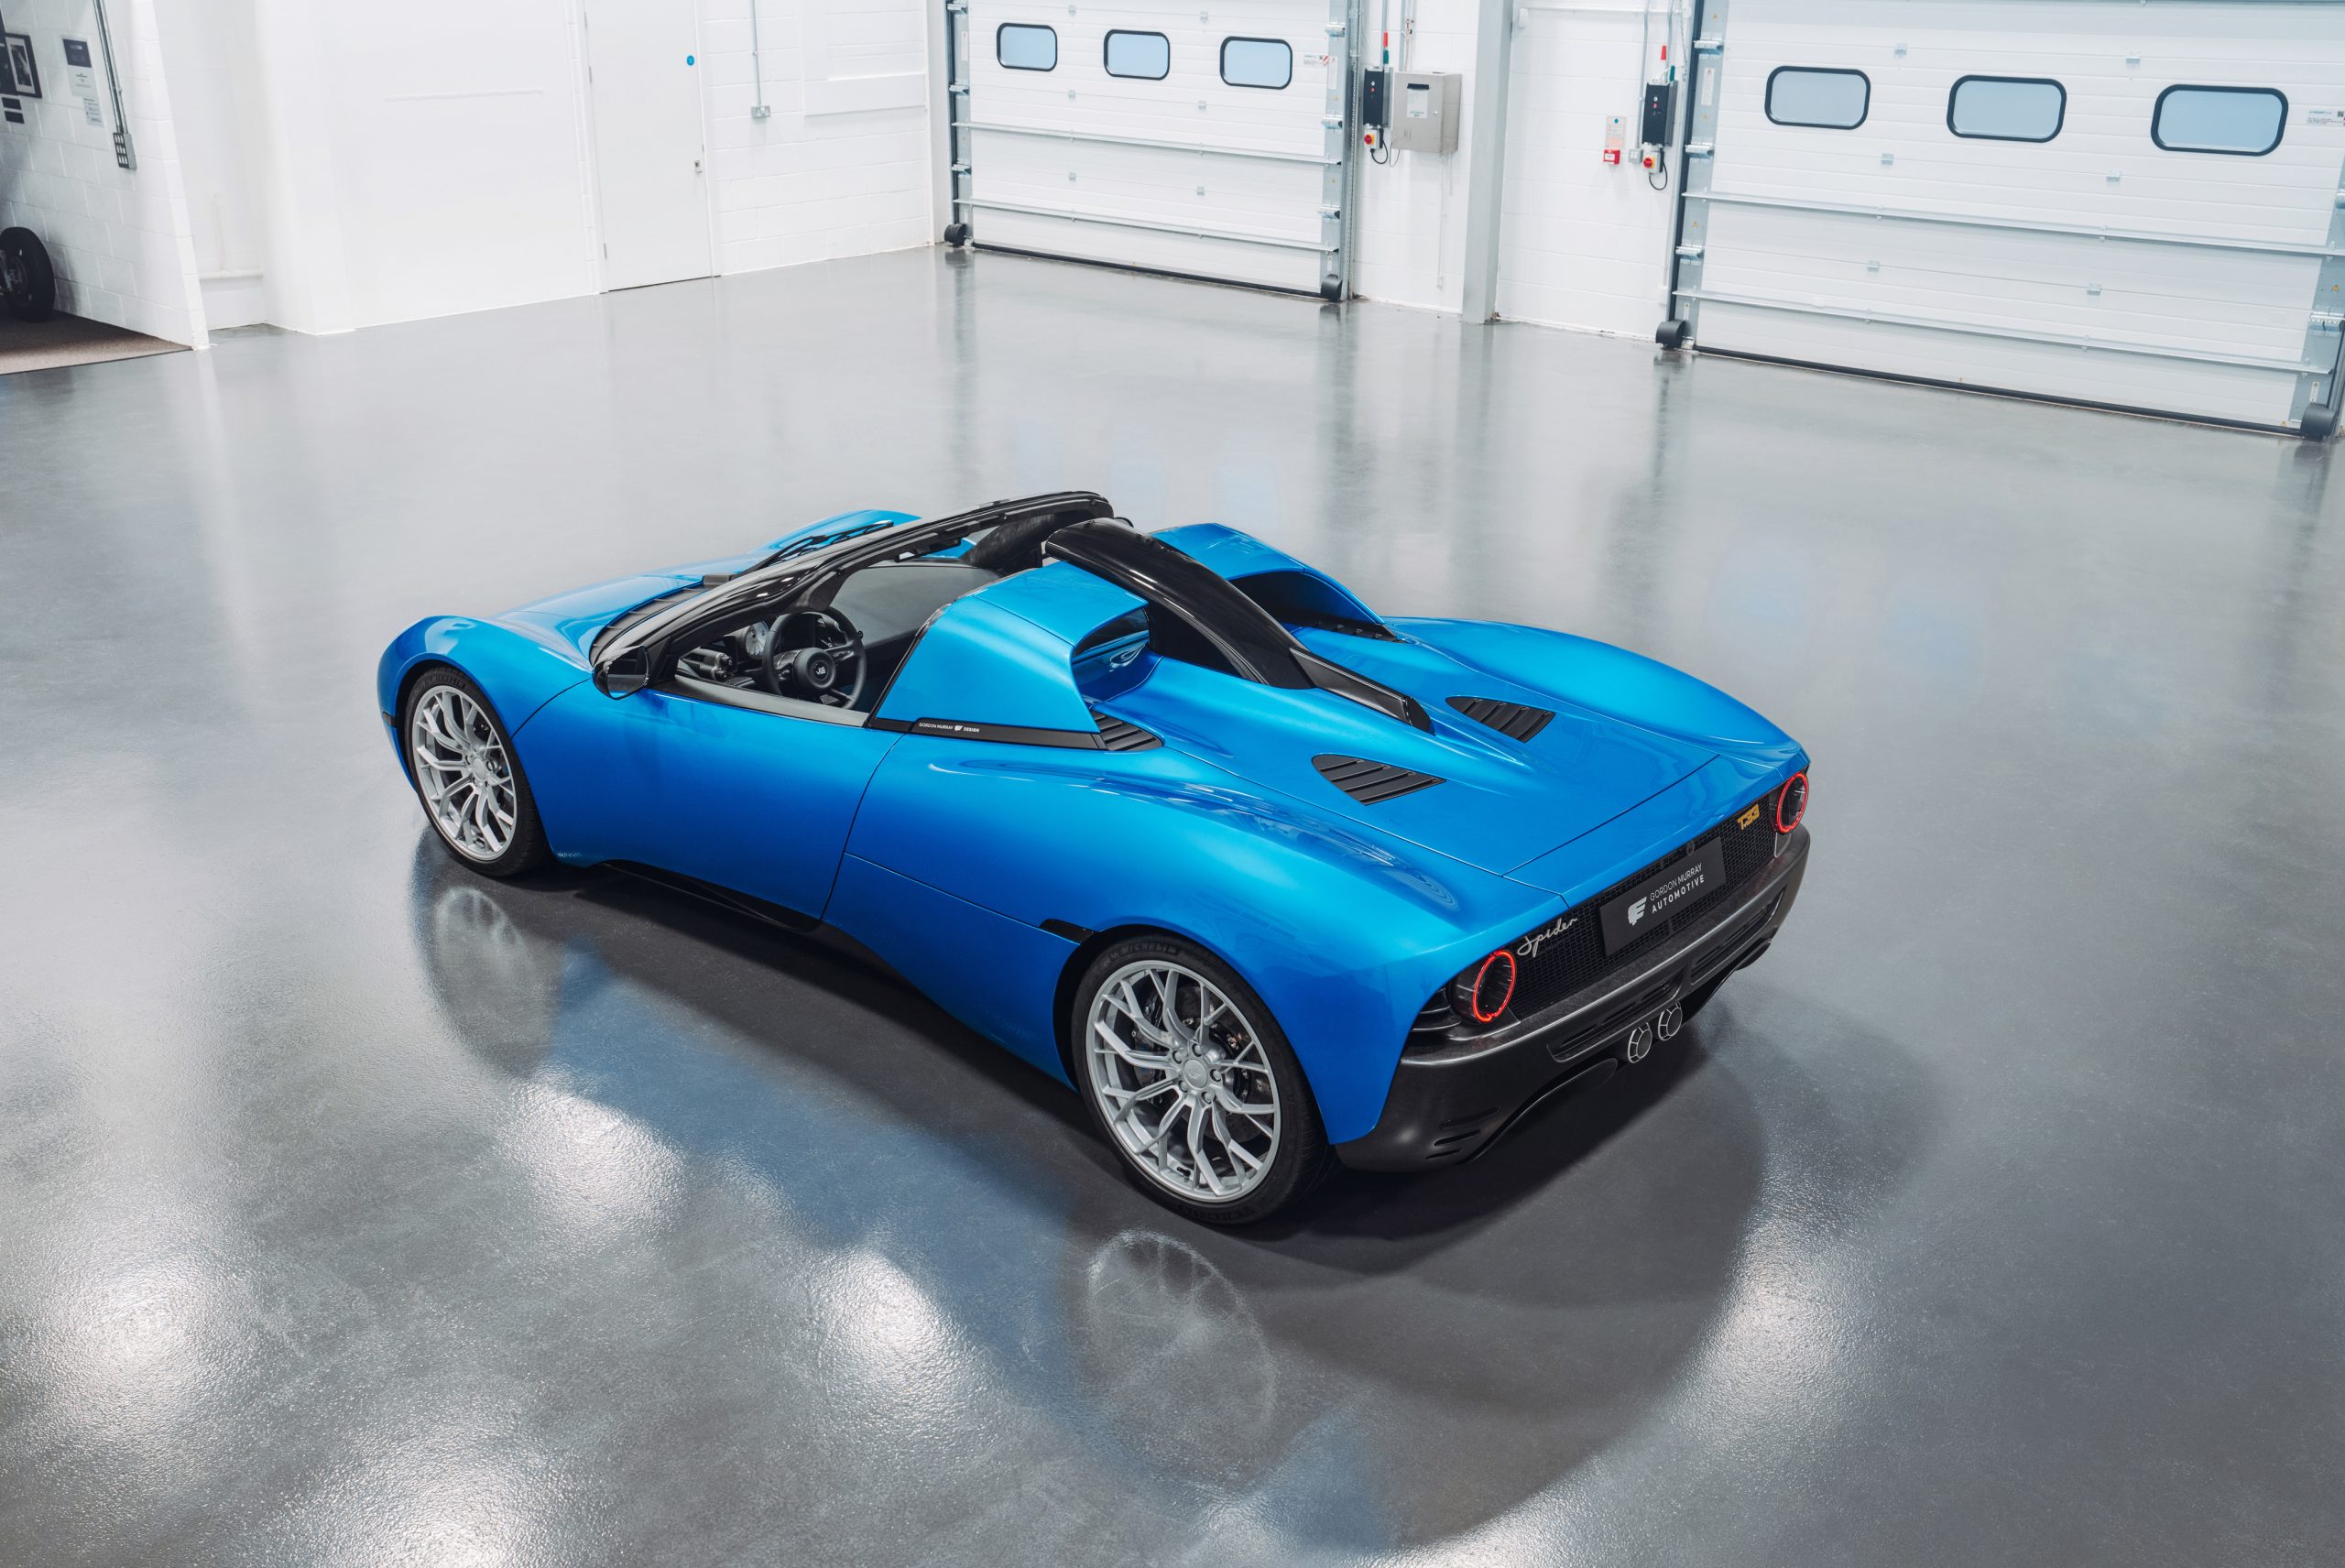 All go at Gordon Murray Automotive: T.33 Spider revealed, T.50 signed off